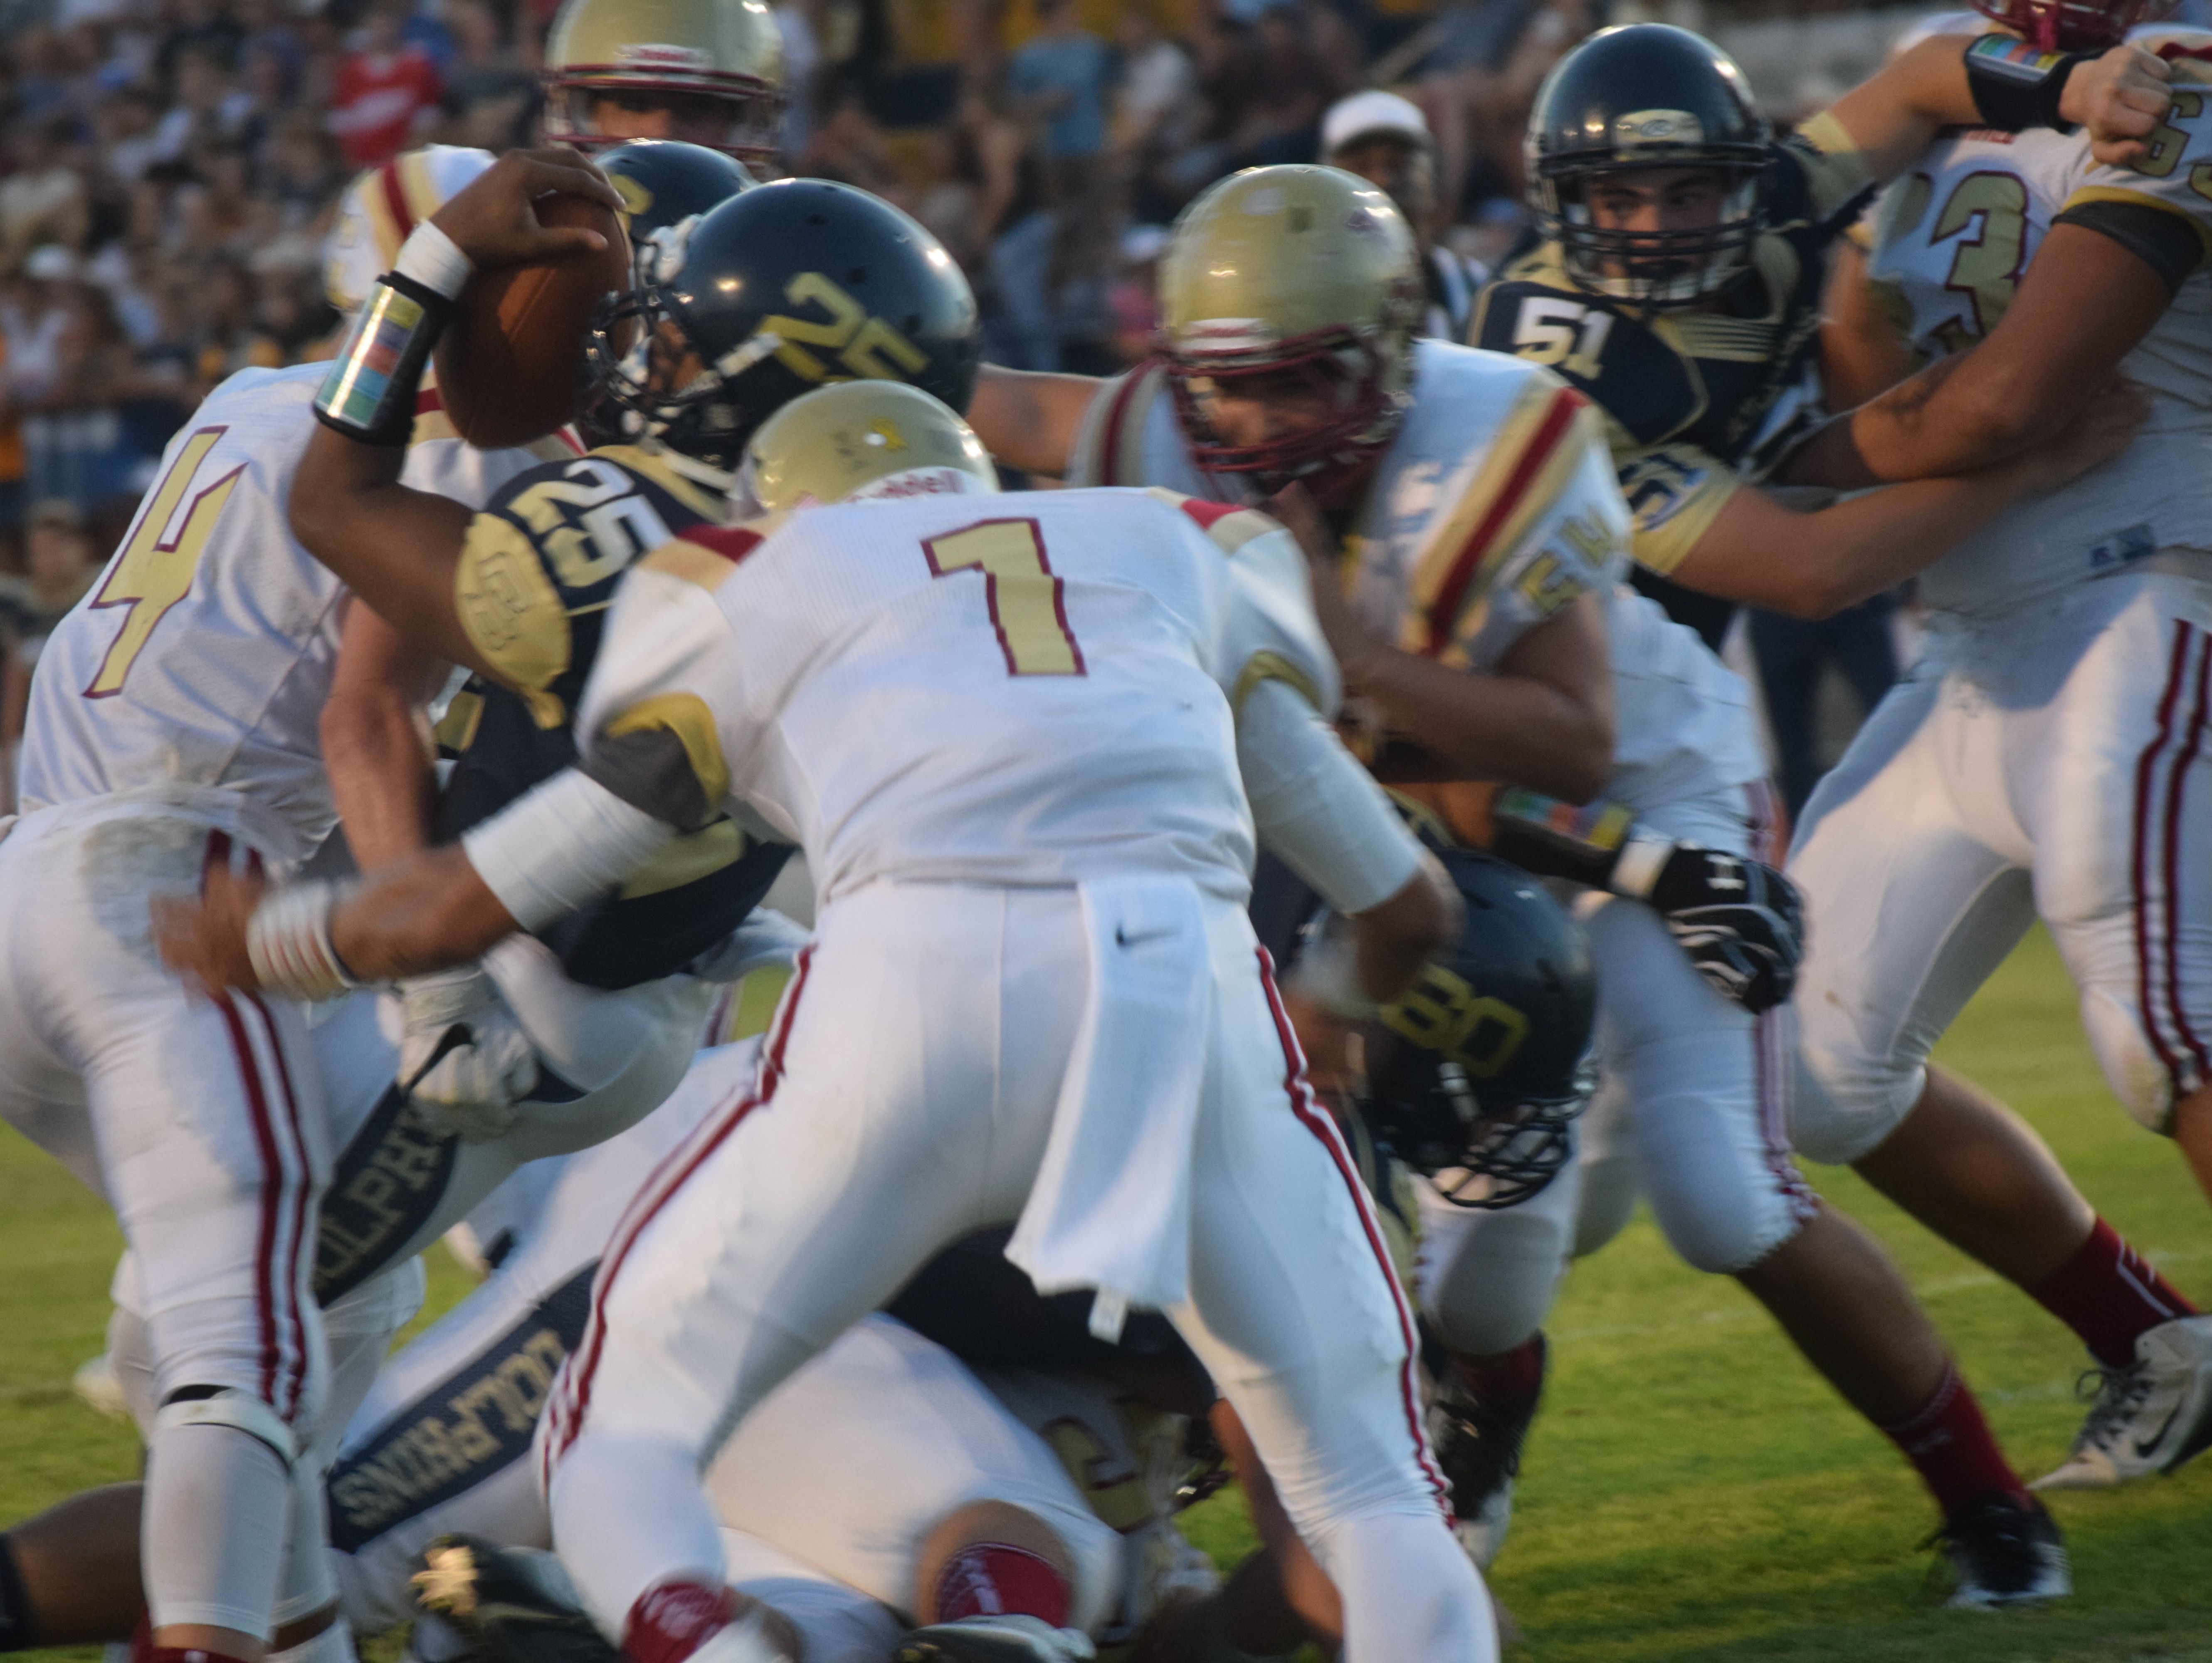 Gulf Breeze sophomore running back Carl Taylor (25) puts the ball over the plane of goal line to score the Dolphins first touchdown Friday night as Northview's Luke Ward closes in.